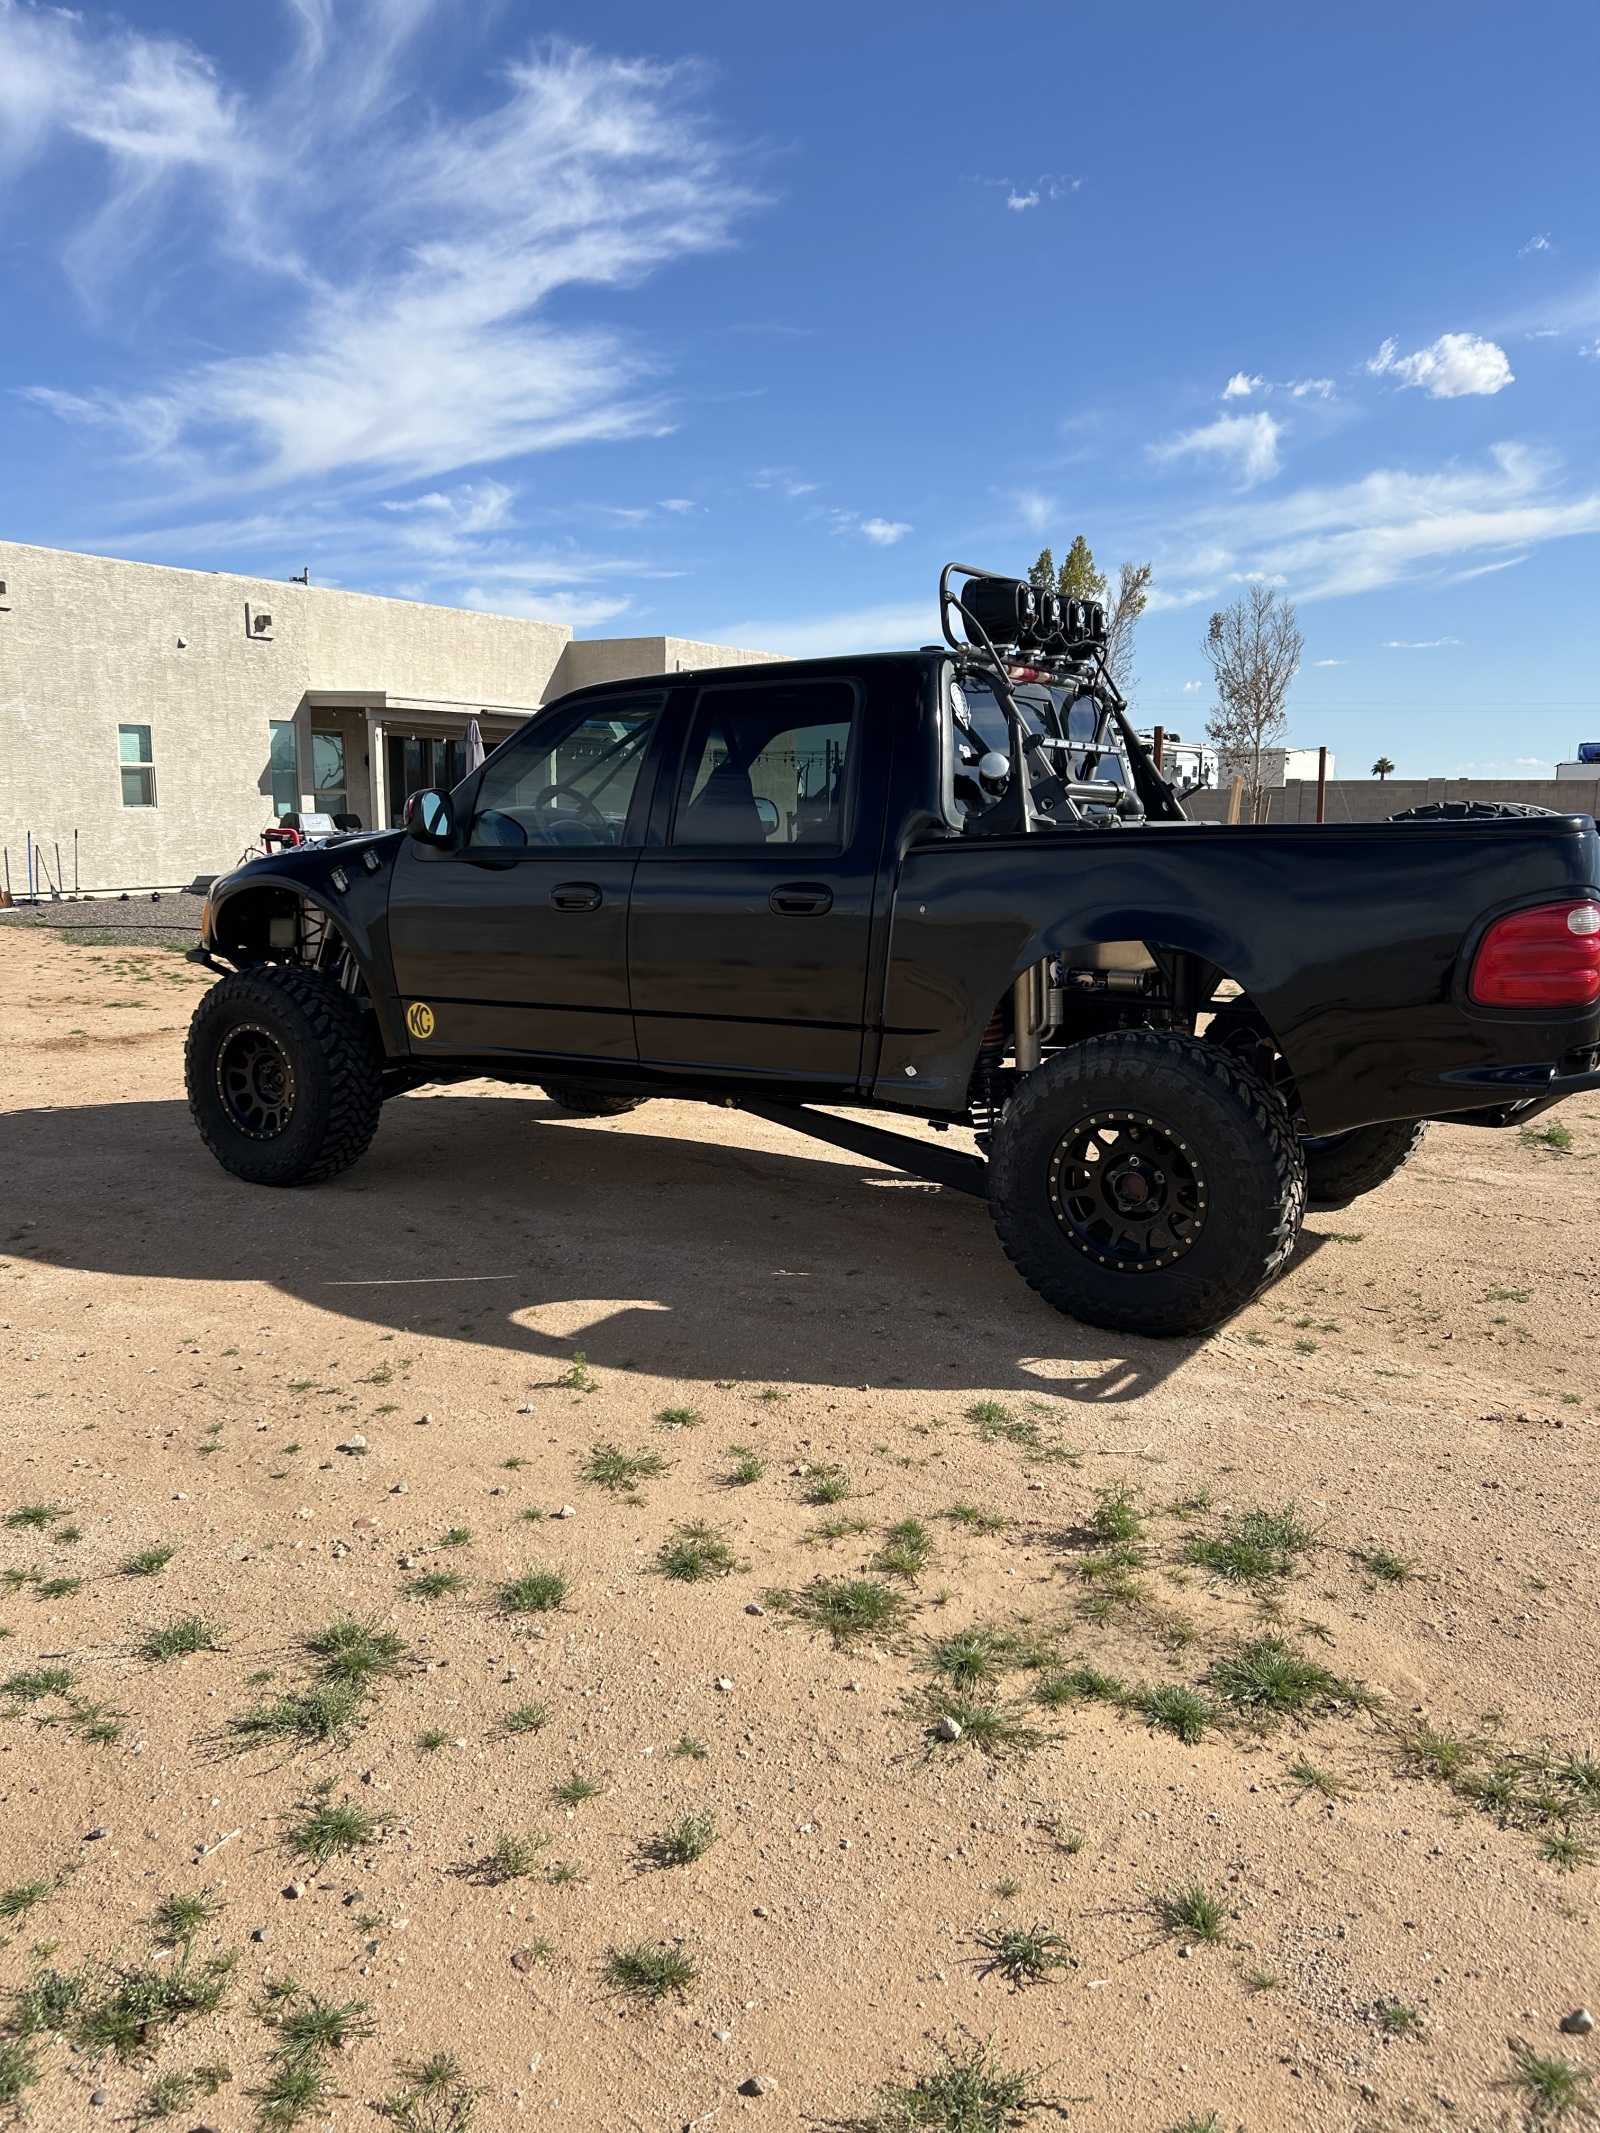 For Sale: 02 F150 Supercrew Linked 4wd Prerunner  - photo1